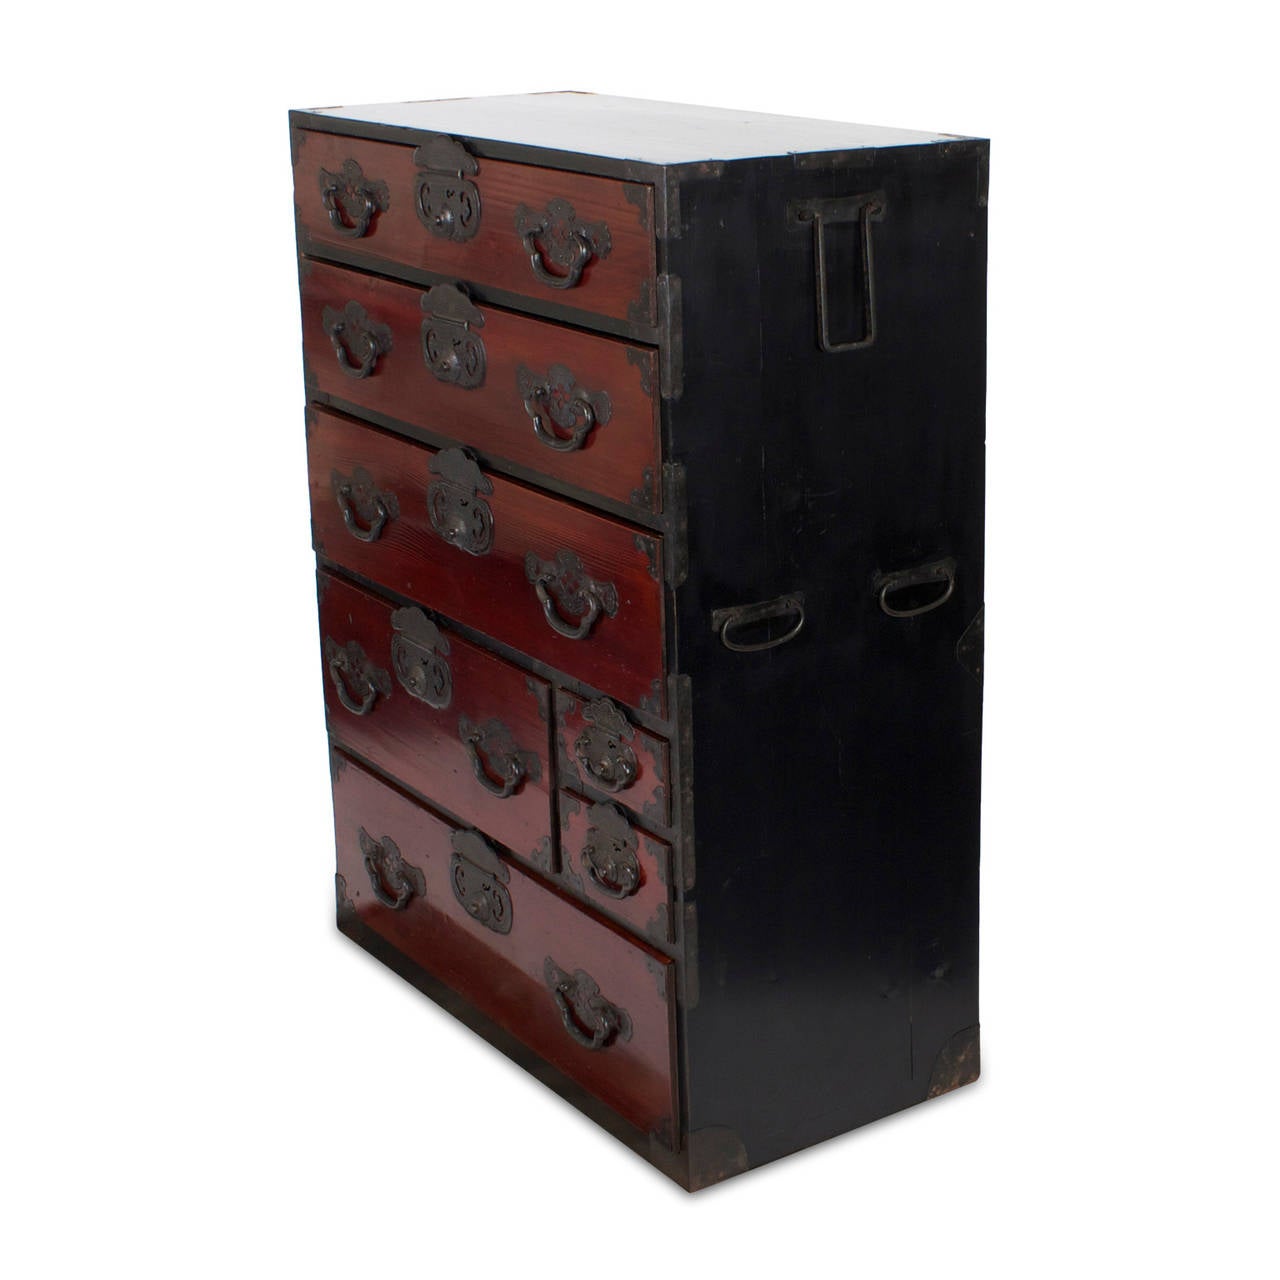 An antique painted softwood tansu chest of drawers with original black and deep red paint, intricate forged iron hardware and carrying with it all the mystery and intrigue of the Far East. Executed in the proportions of a gentleman's chest. Newly